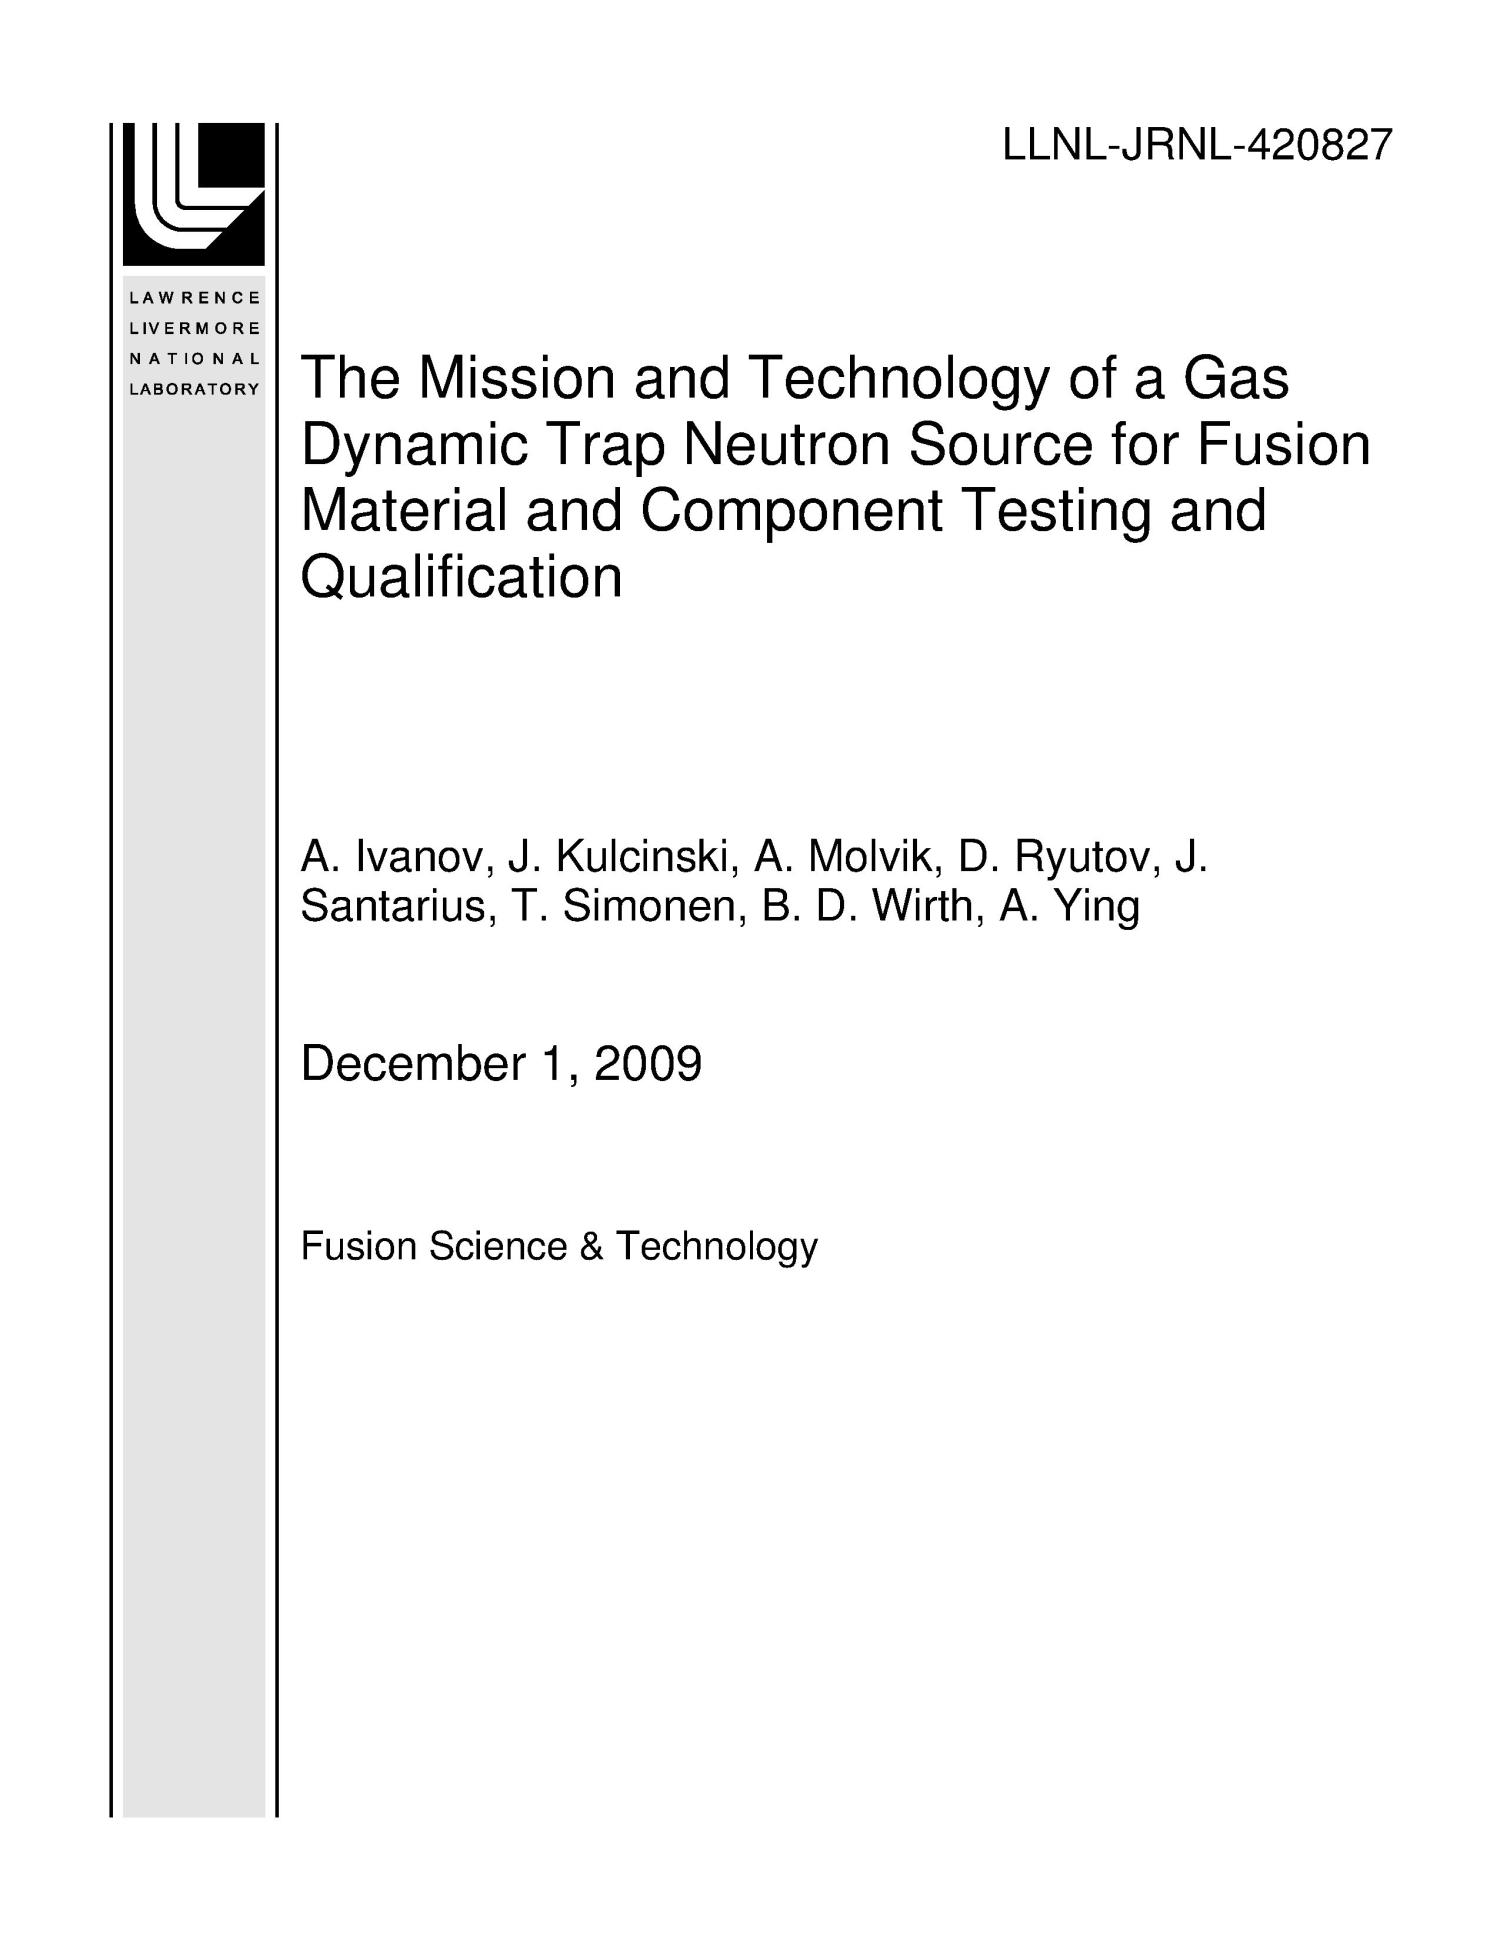 The Mission and Technology of a Gas Dynamic Trap Neutron Source for Fusion Material and Component Testing and Qualification
                                                
                                                    [Sequence #]: 1 of 83
                                                